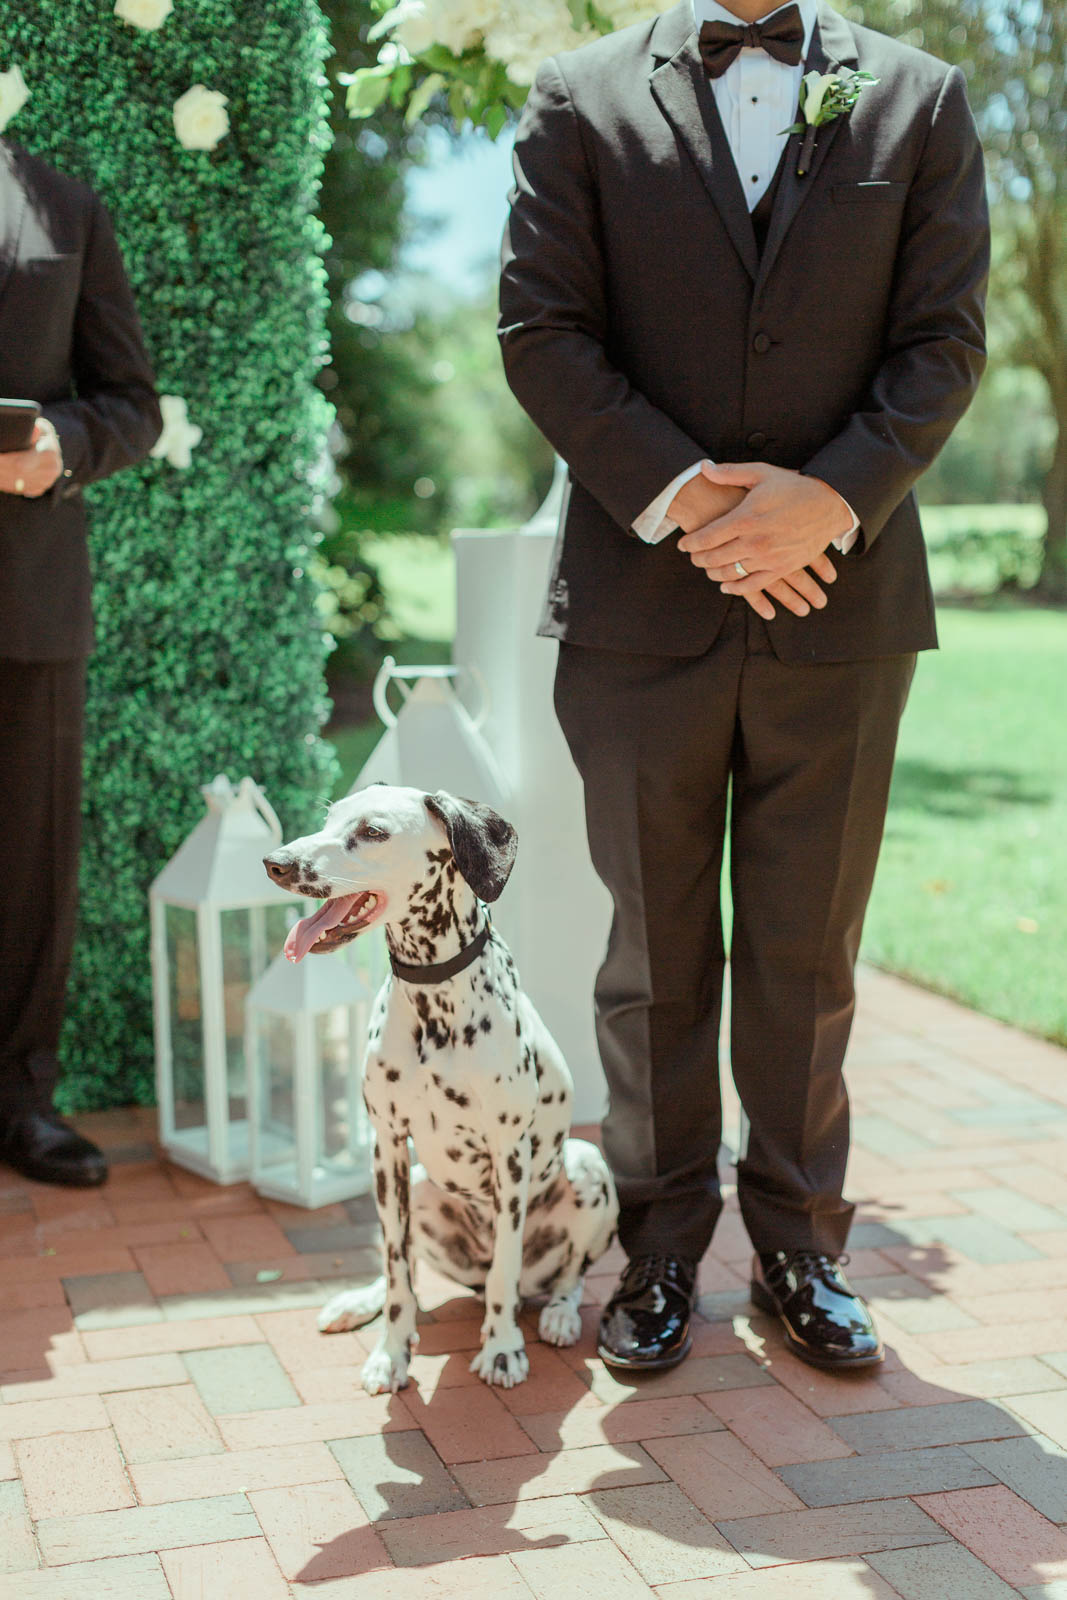 Dalmatian standing next to groom for wedding ceremony.